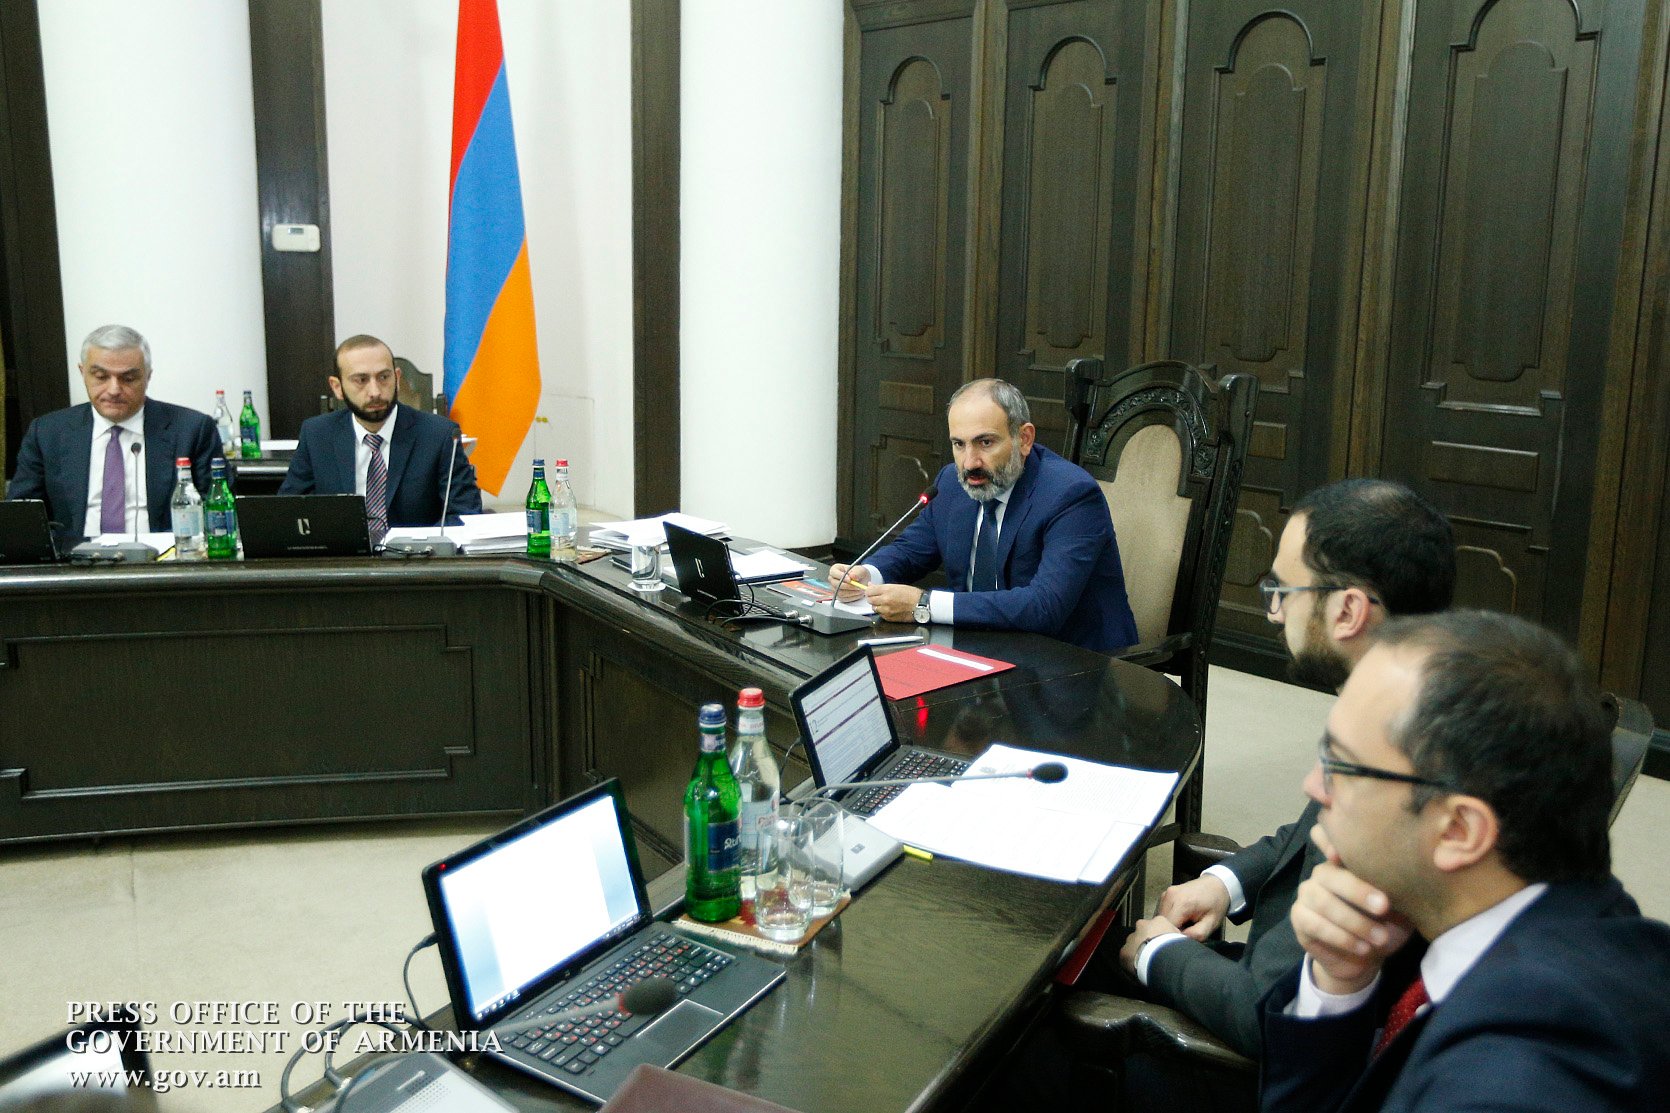 Nikol Pashinyan: ‘We will have to get down in earnest to implementing large-scale reforms in the near future’